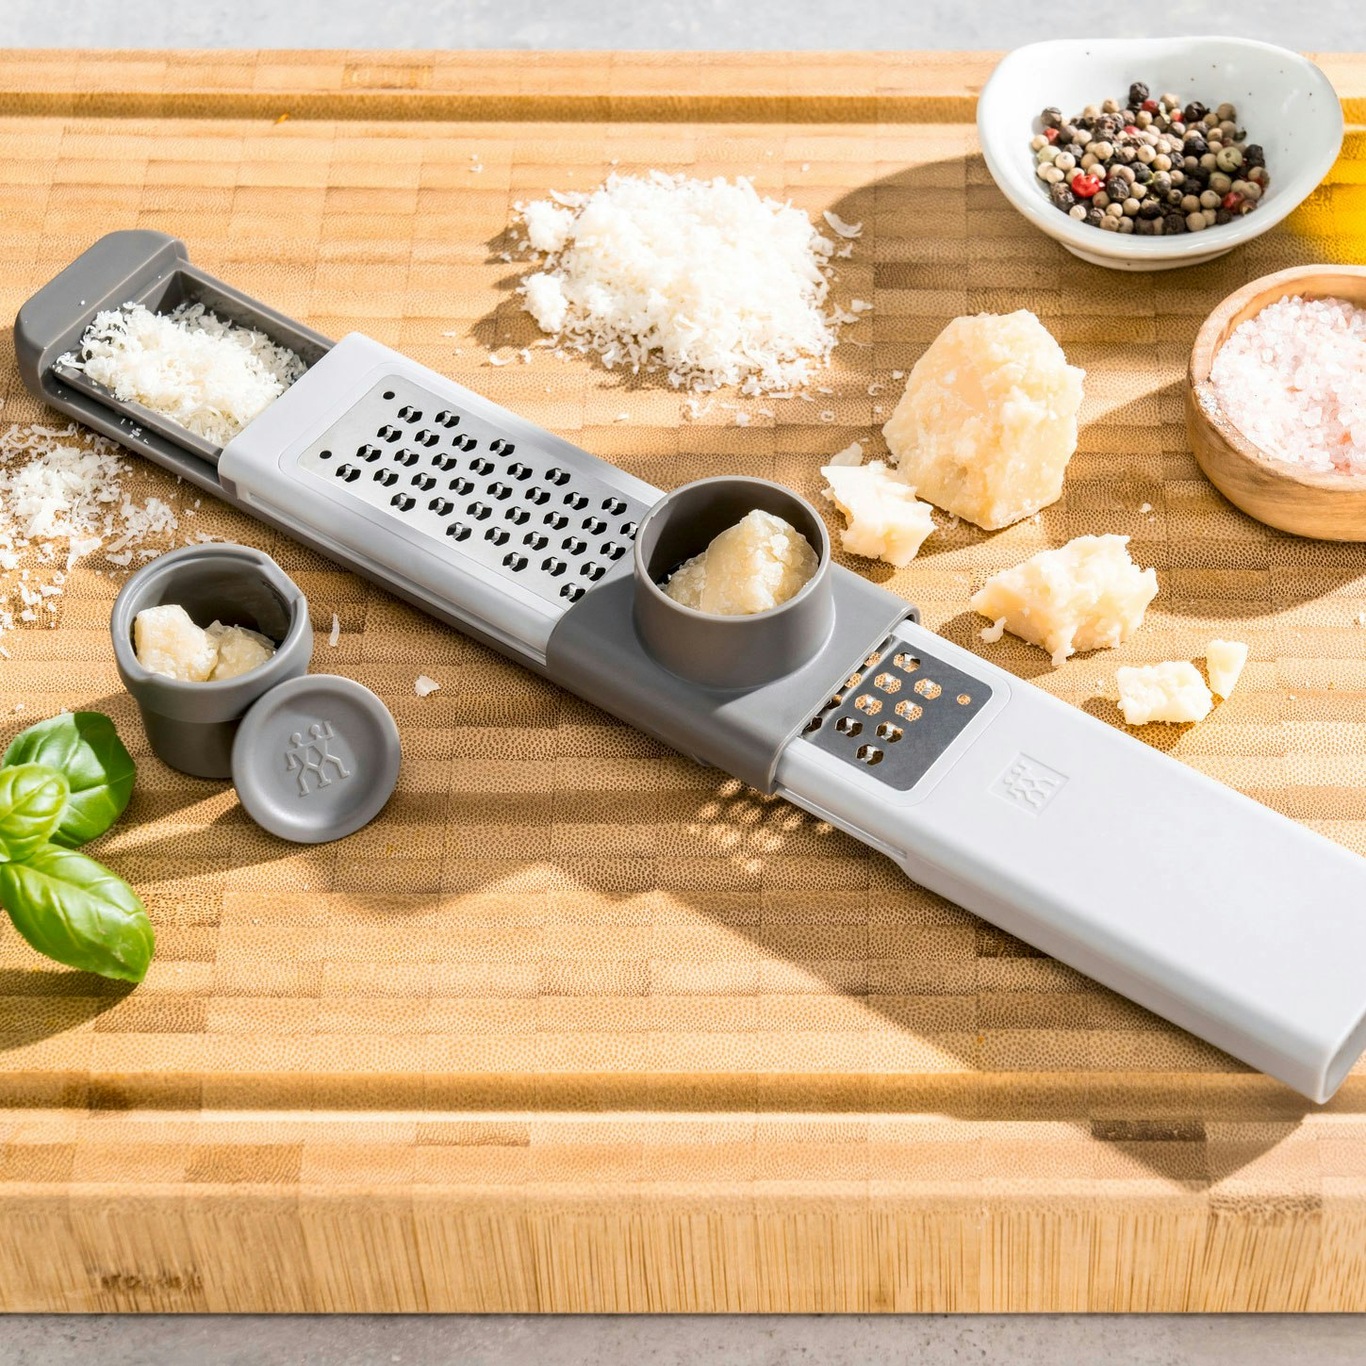 Zyliss Cheese Graters for sale